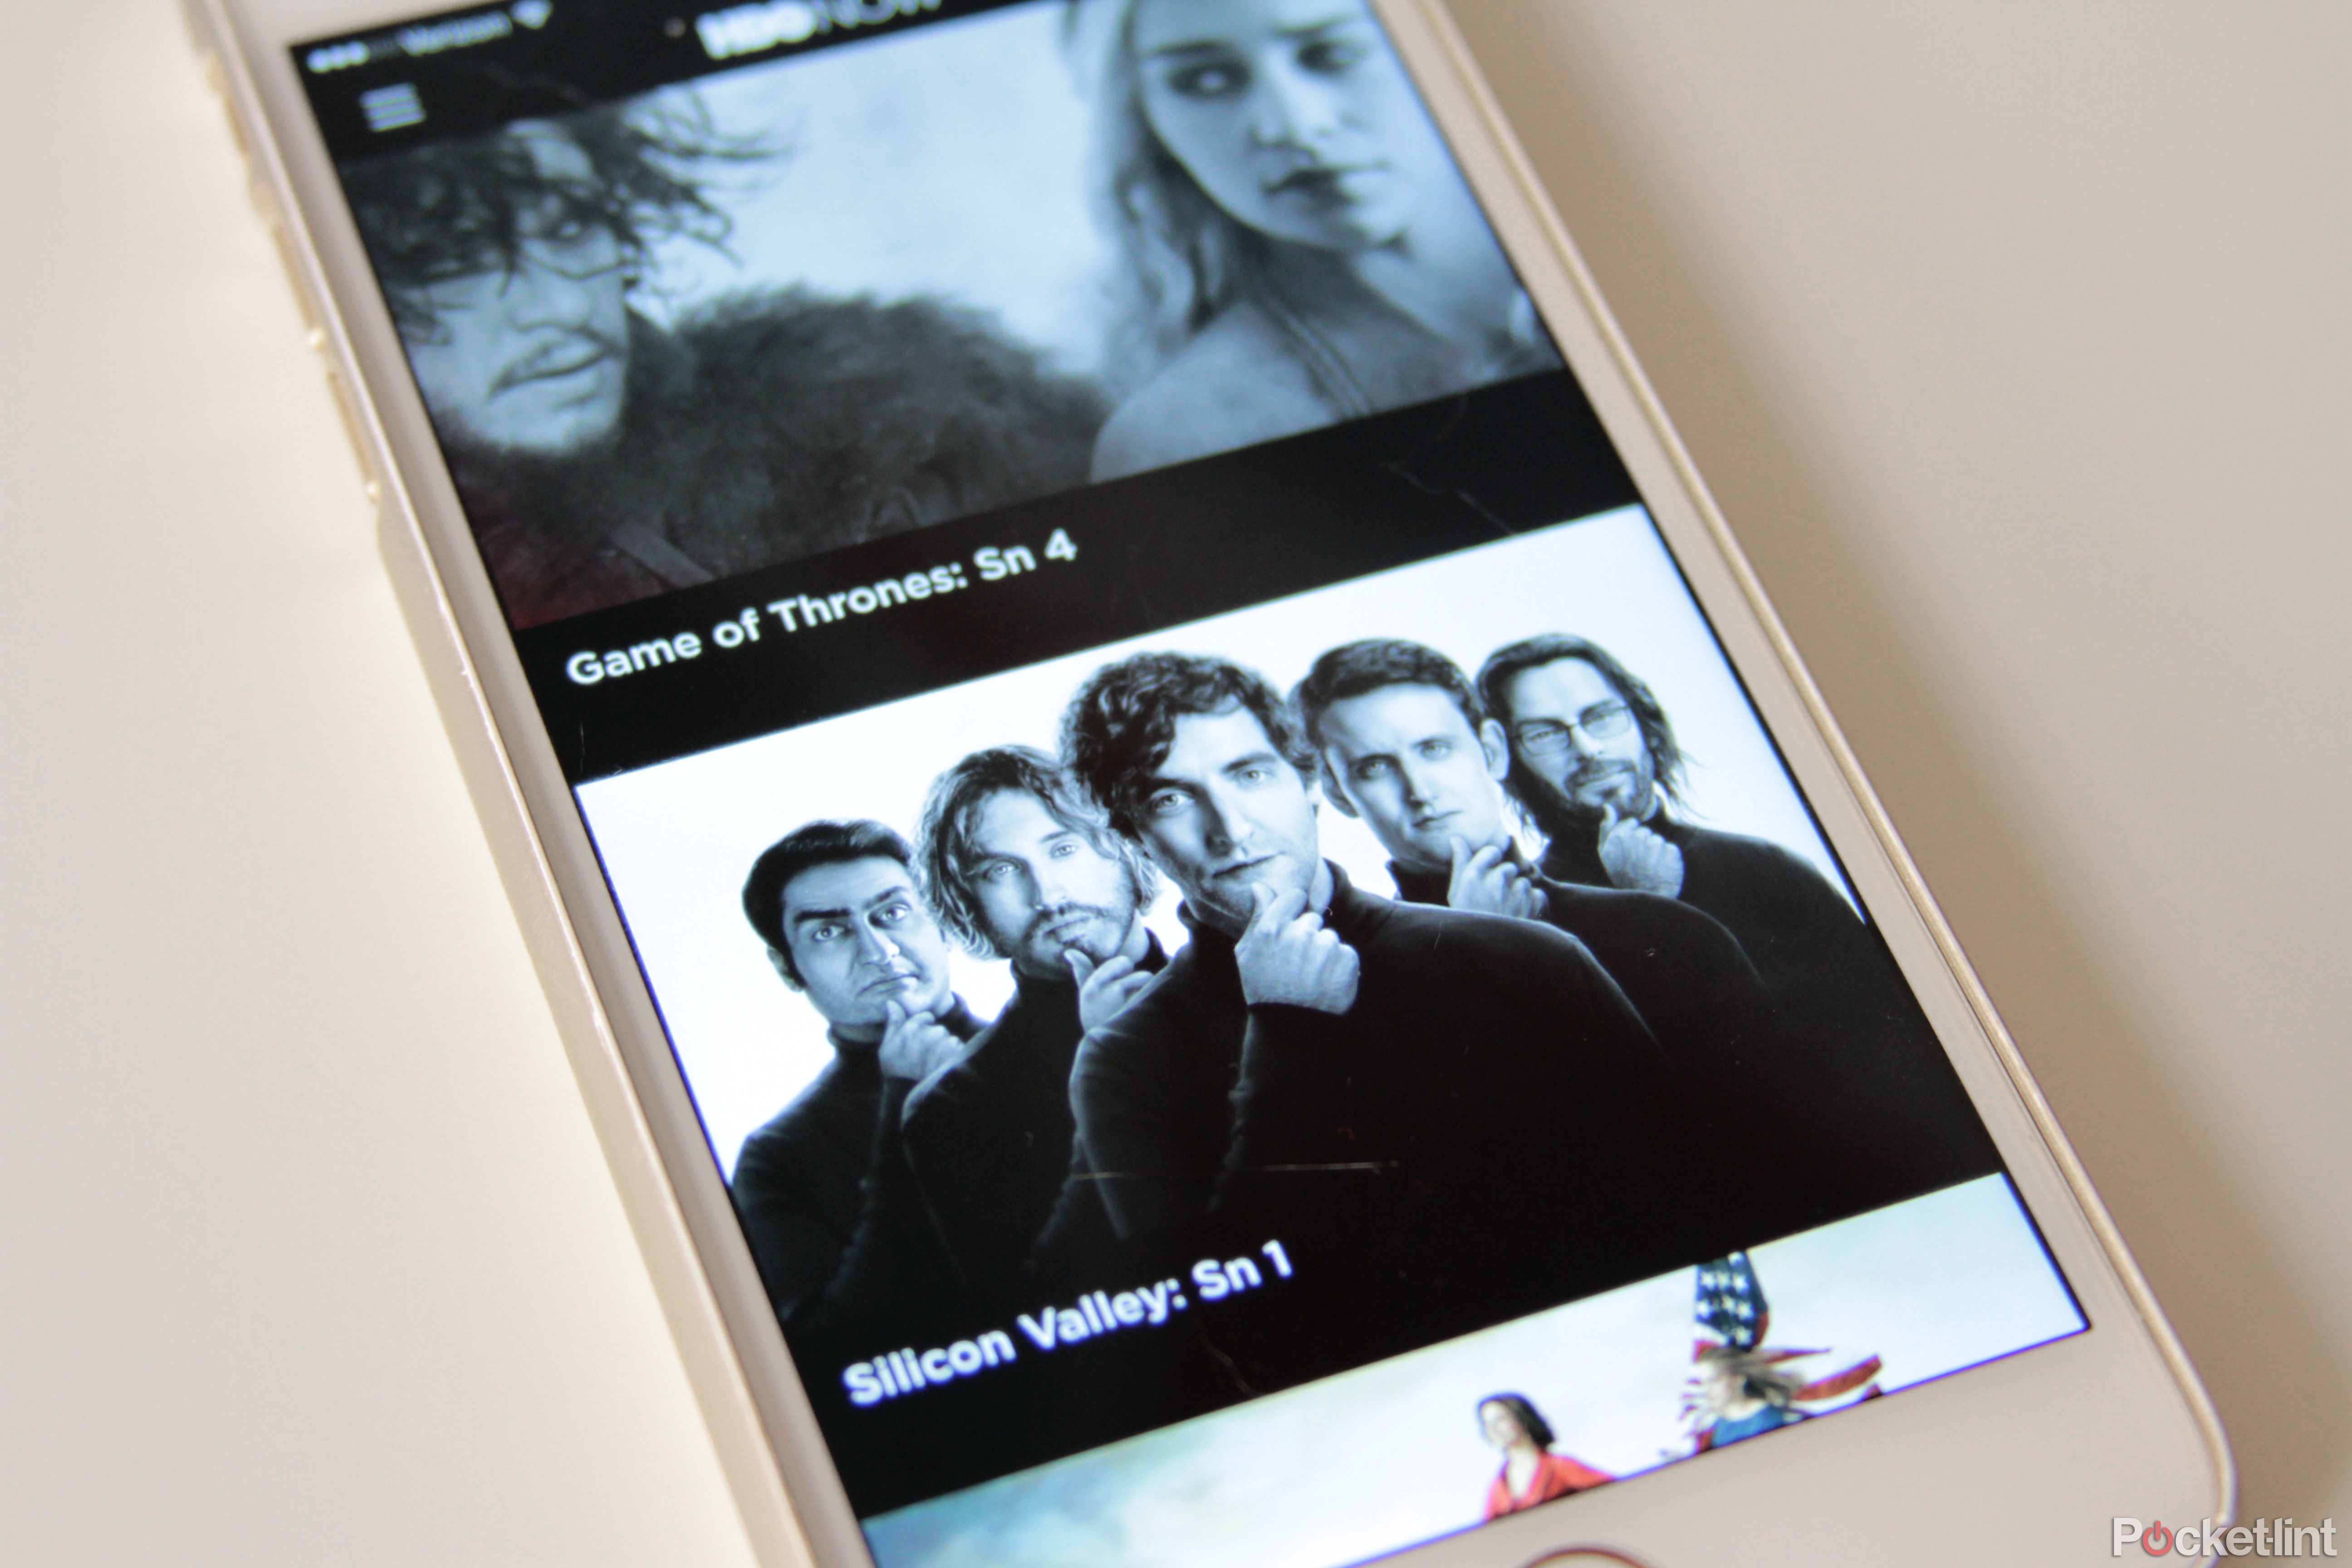 hbo now hands on a true cord cutting experience at last and just in time for got image 14